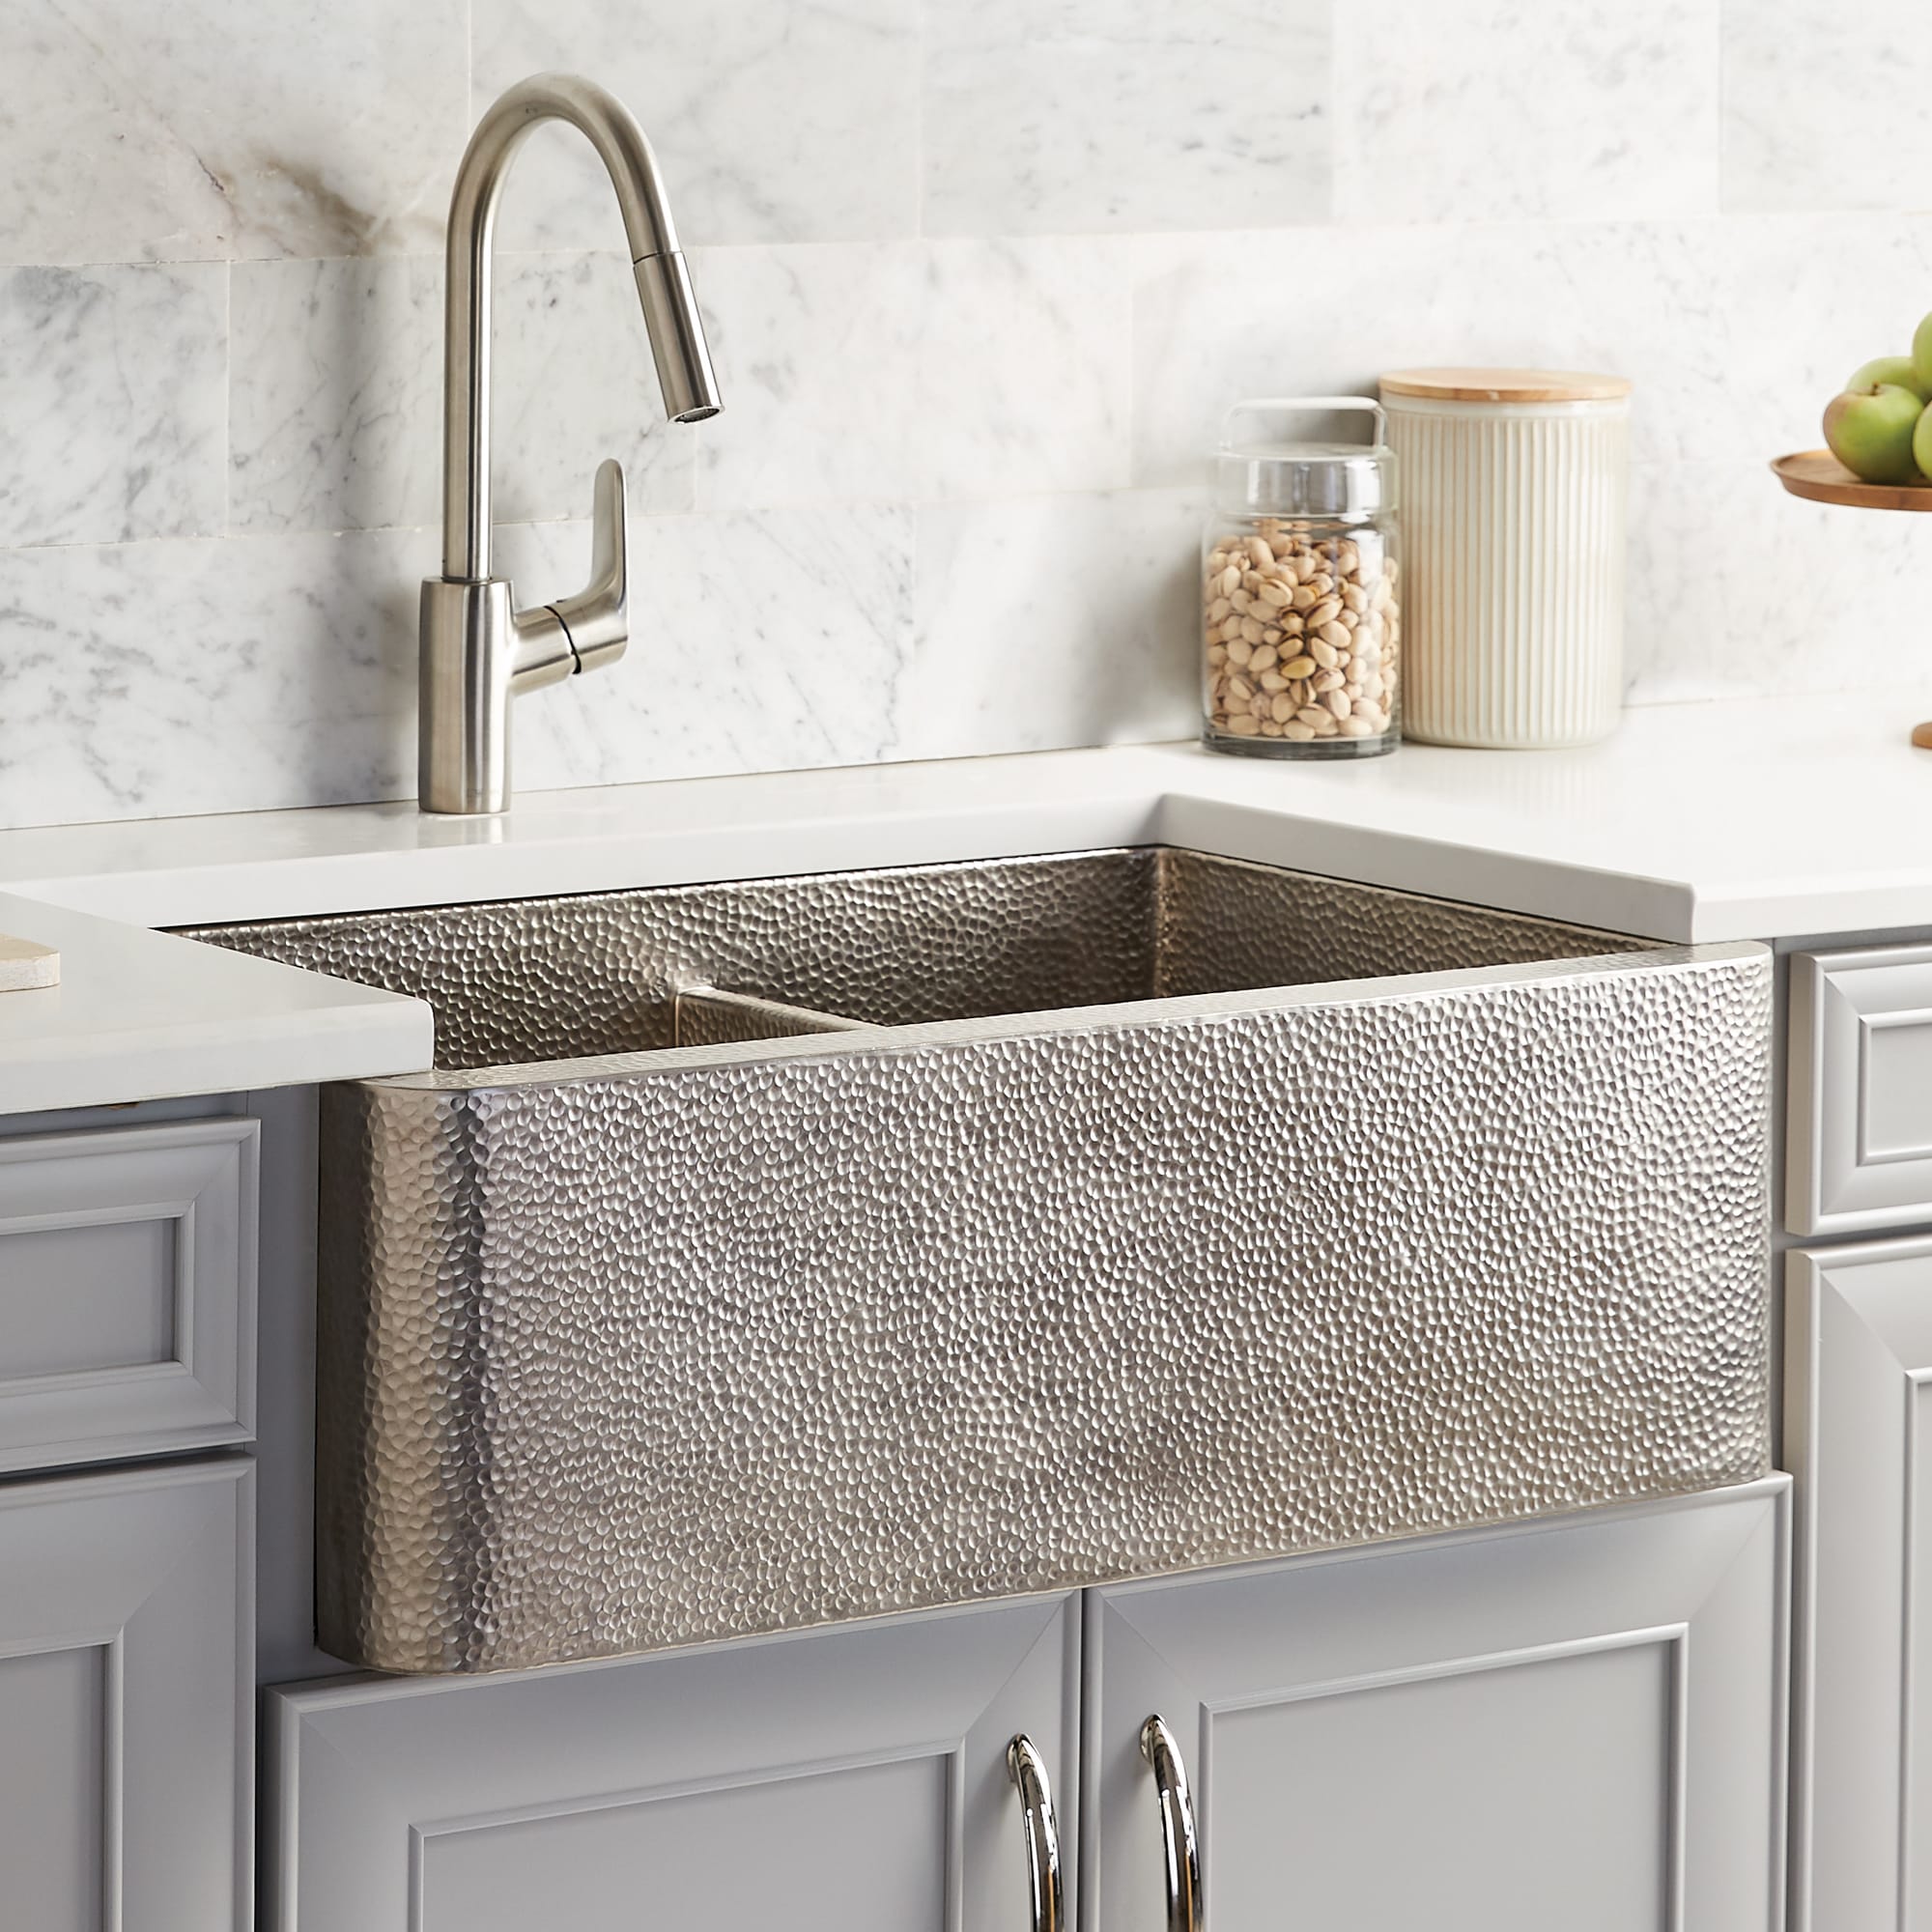 Native Trails Farmhouse Duet 33 Nickel Farmhouse Sink, 60/40 Double Bowl, Brushed Nickel, CPK576